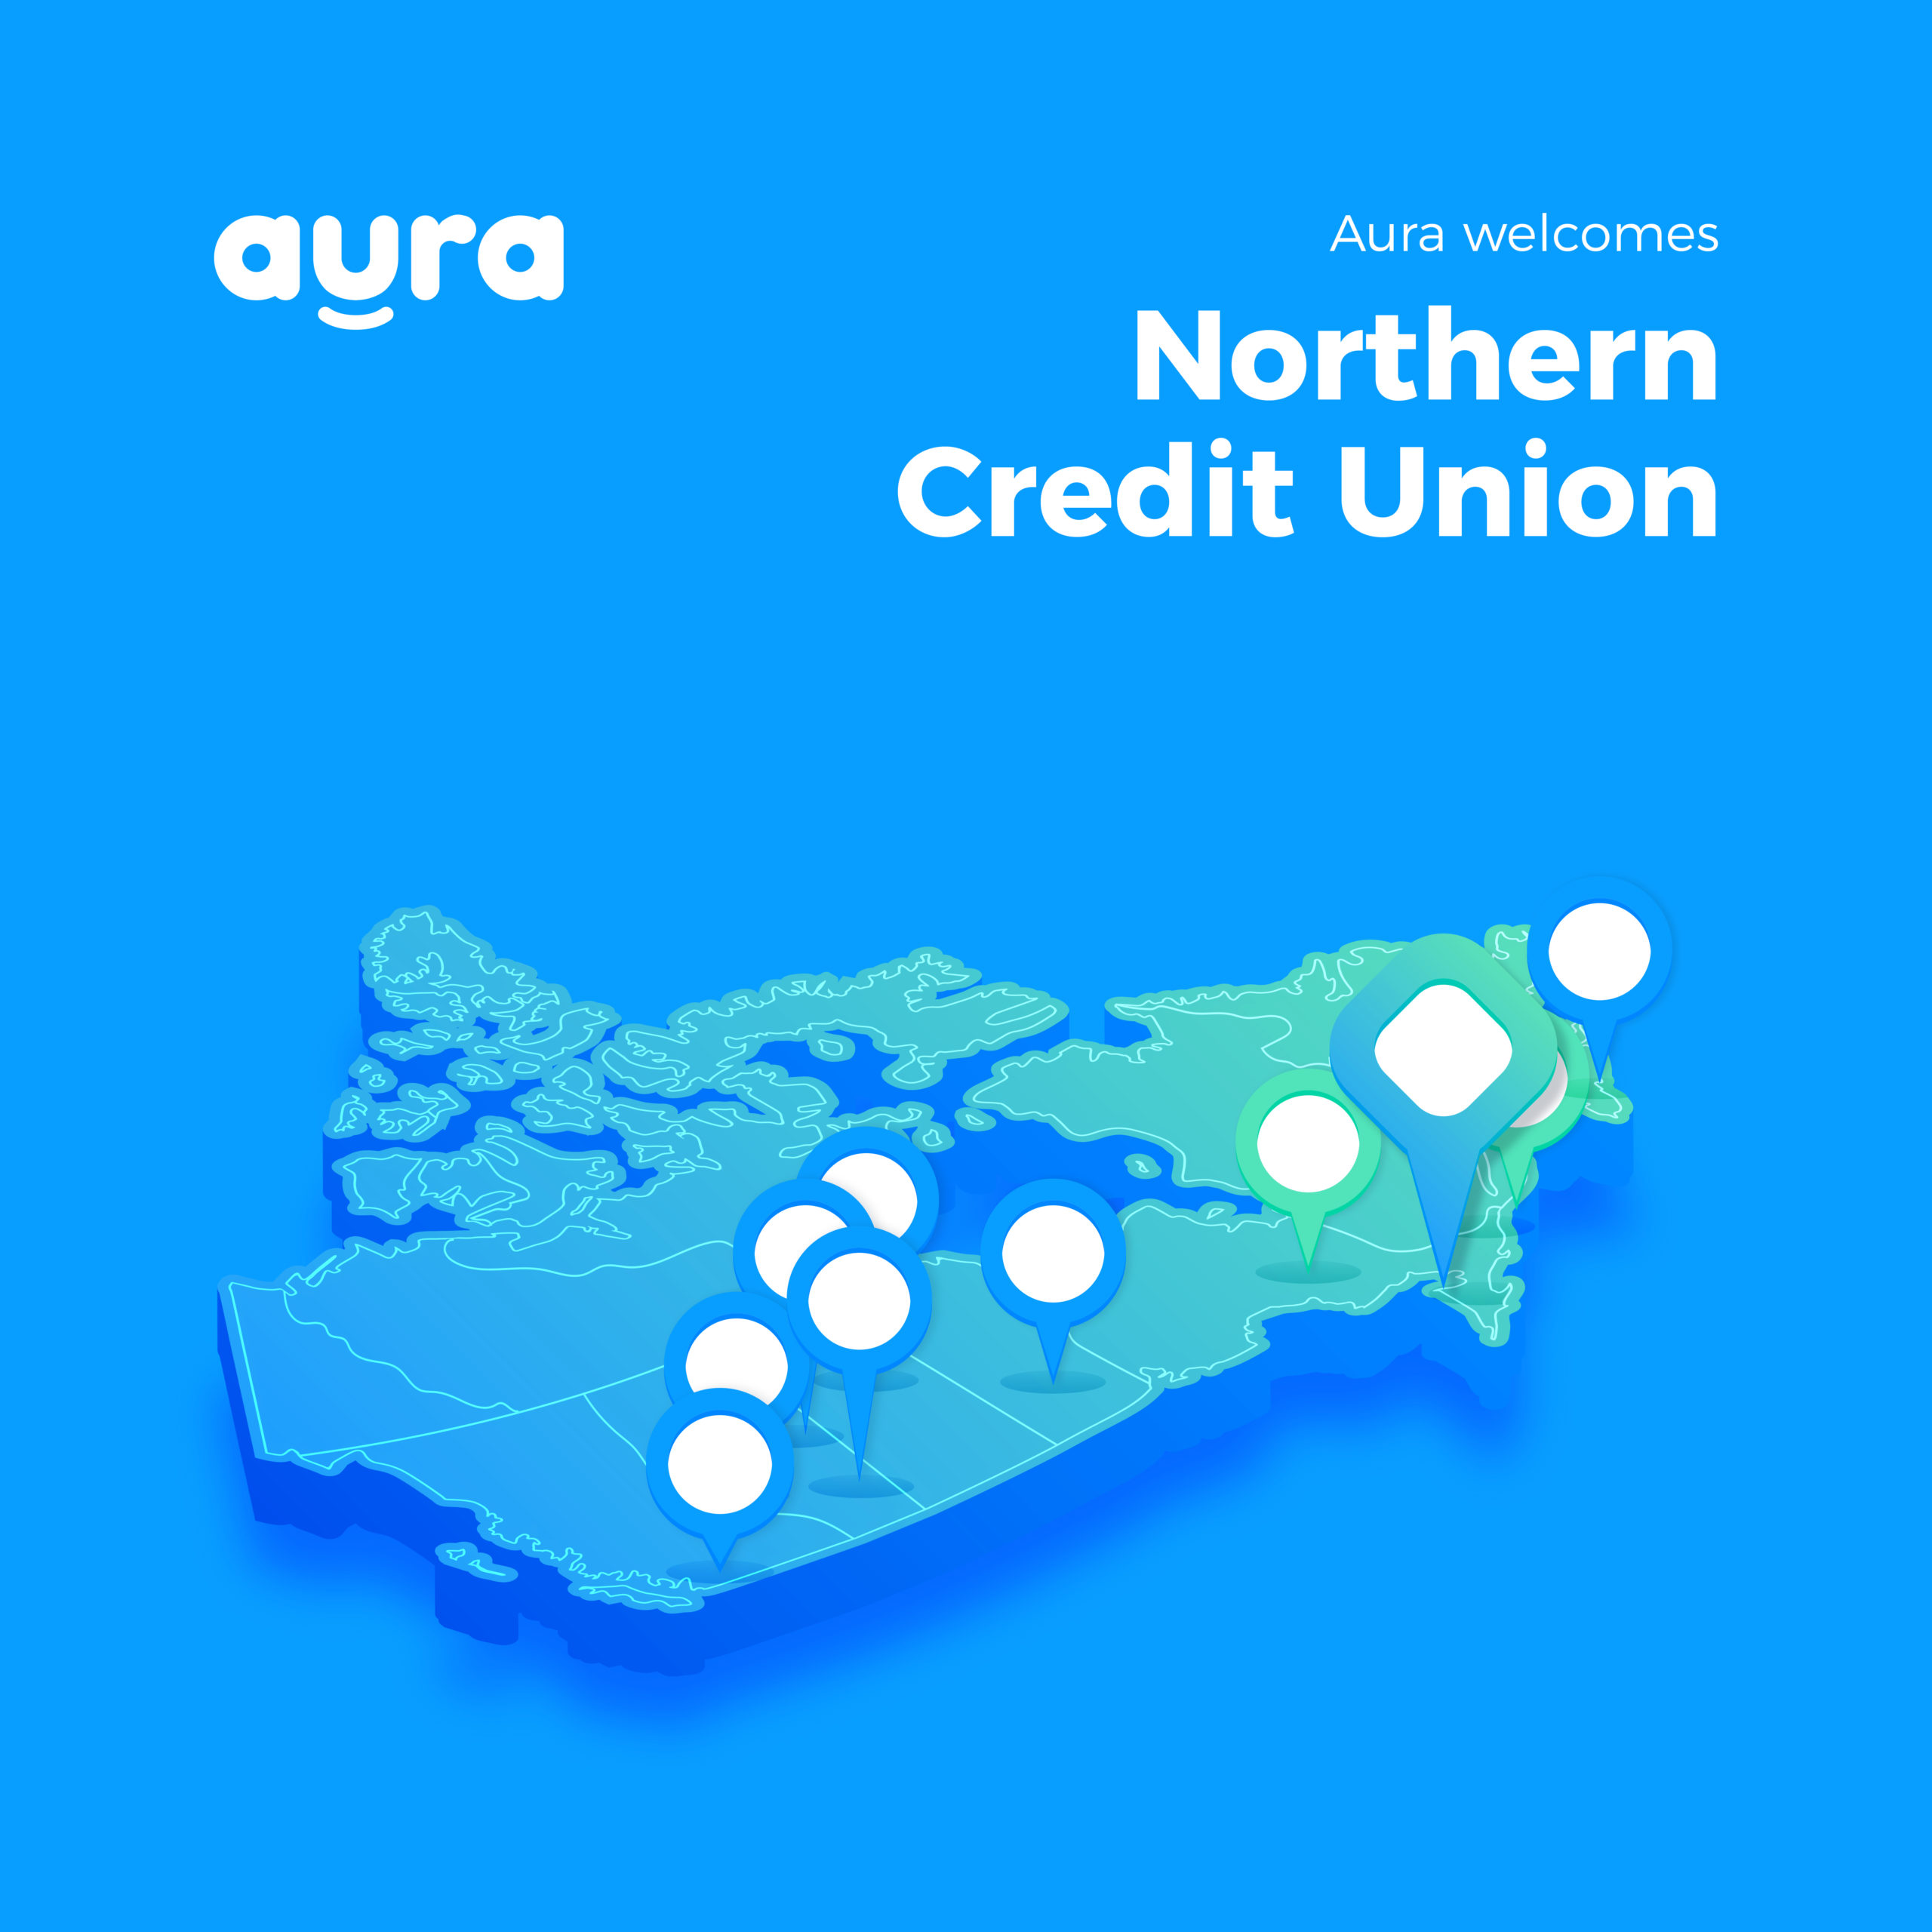 Northern Credit Union Chooses Aura Loyalty to Provide Prepaid Mastercard to Members